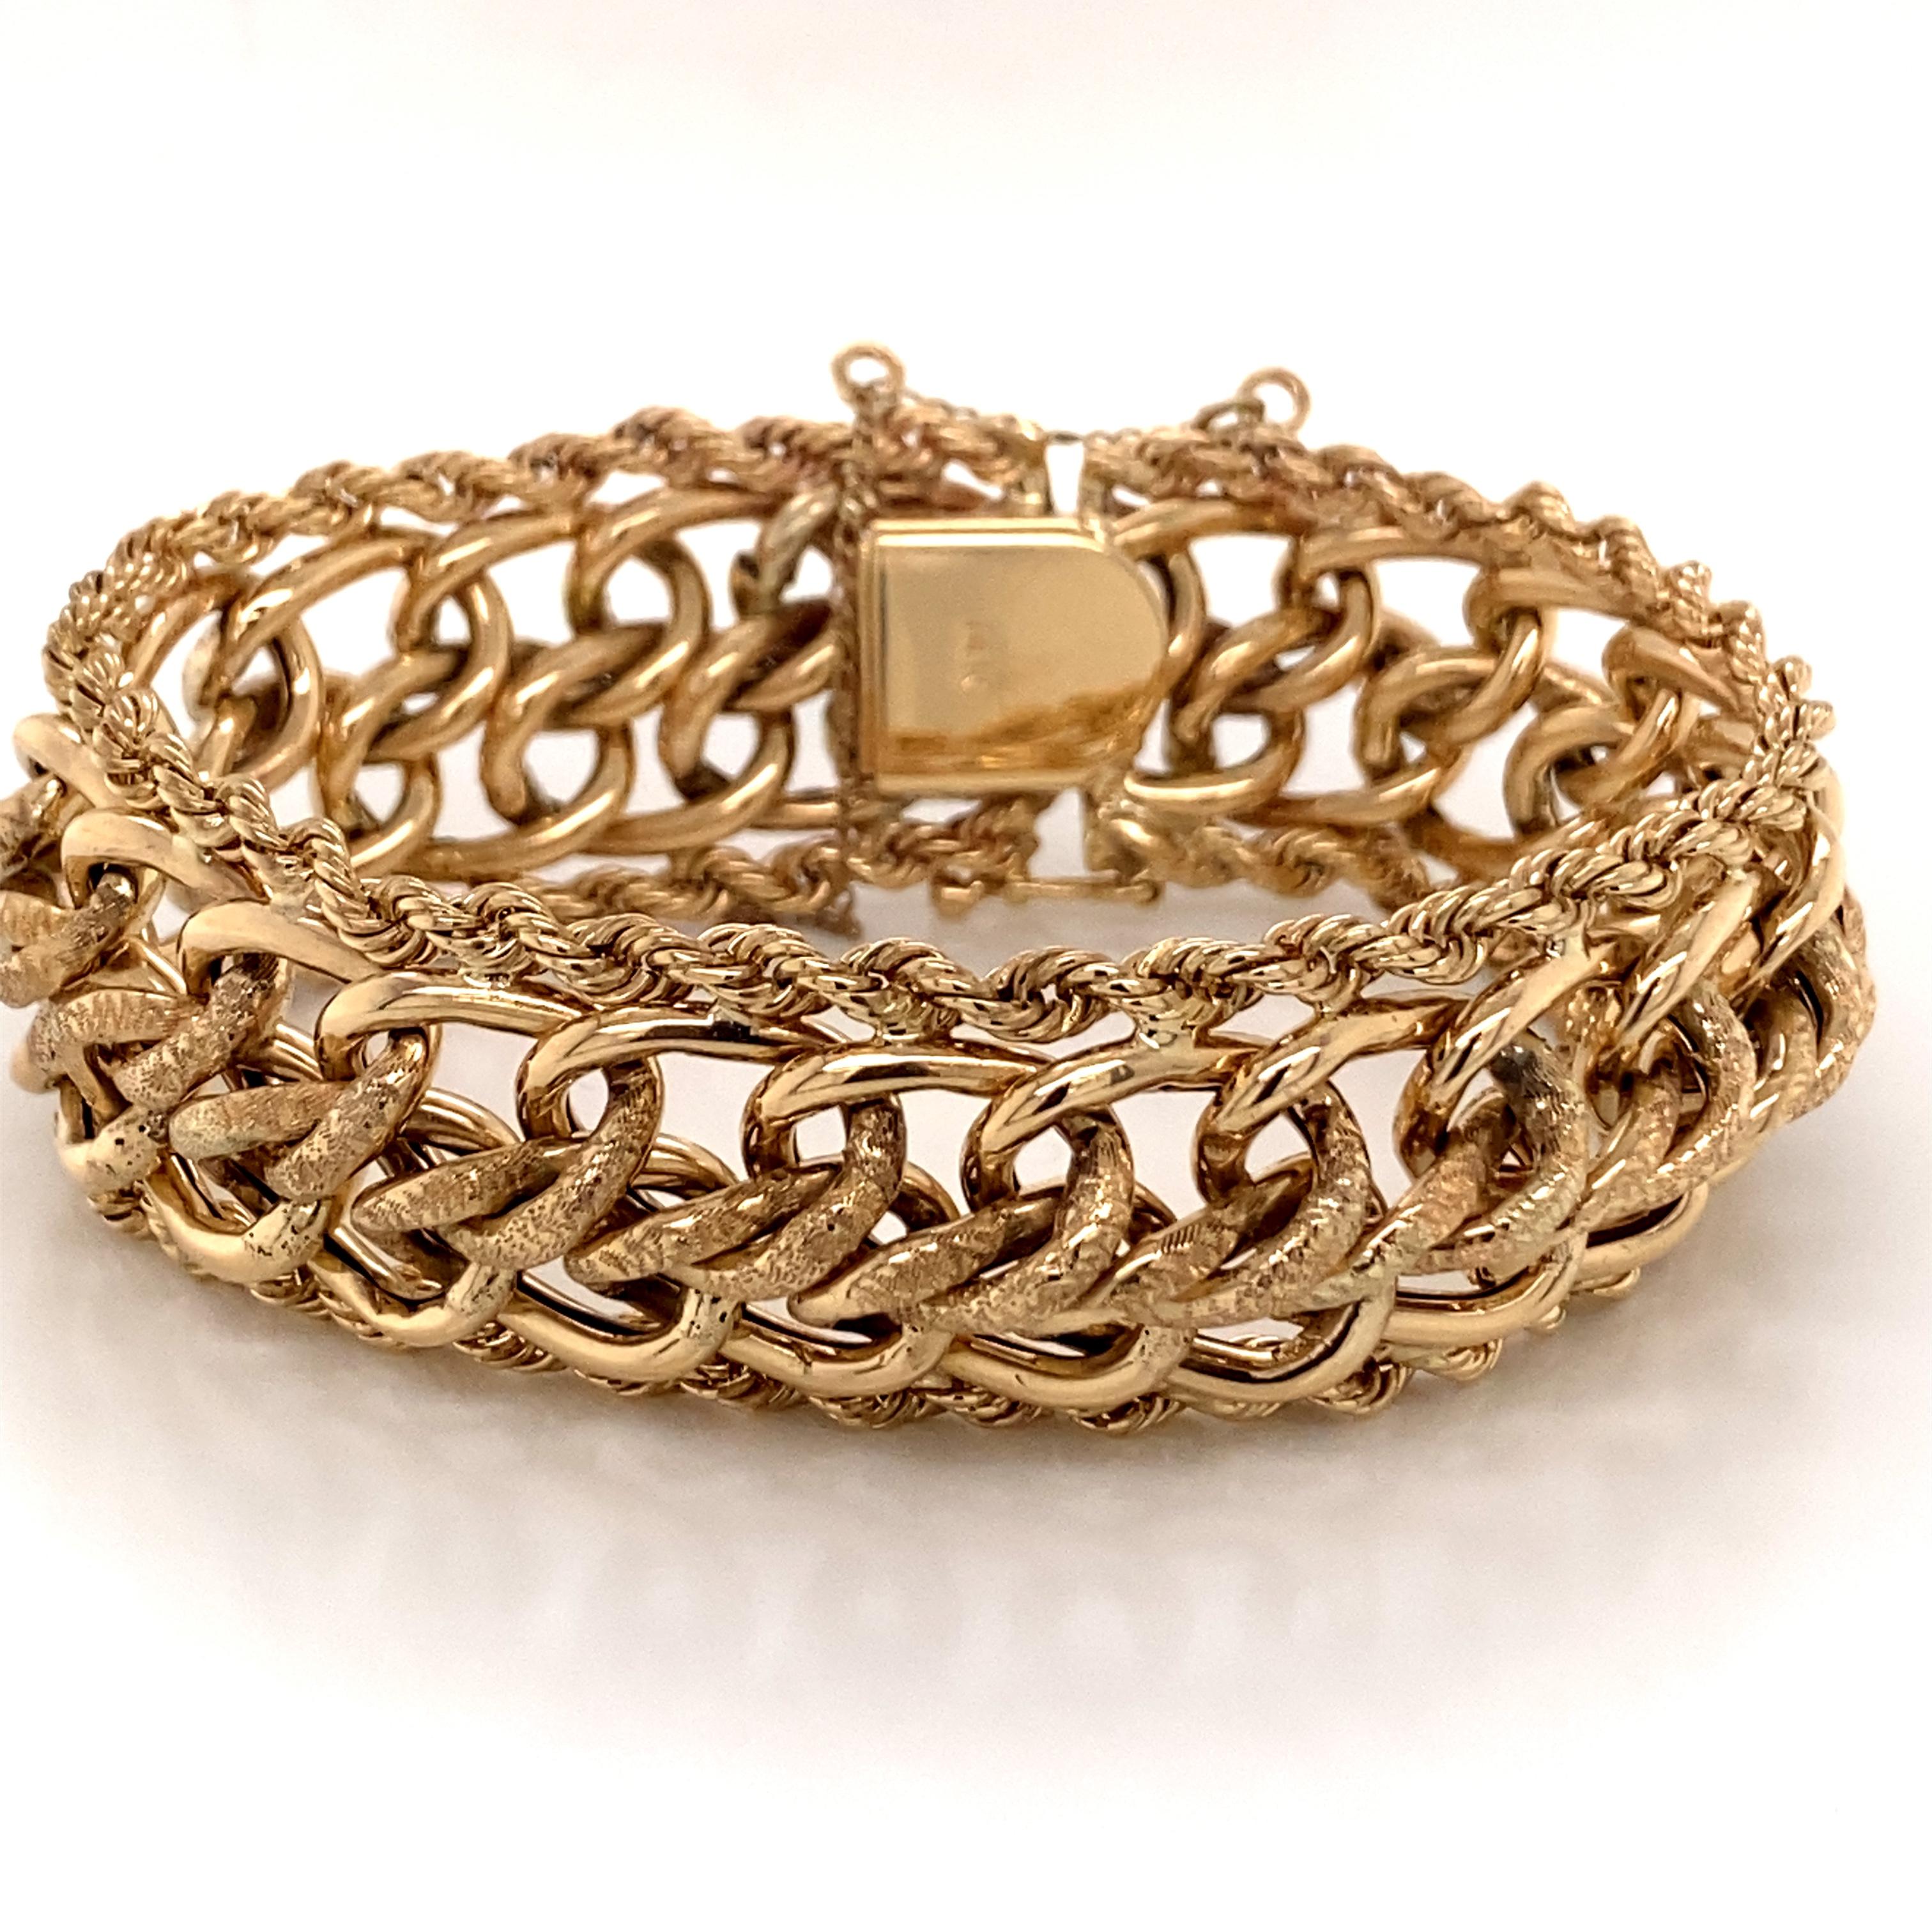 1960s 14 Karat Yellow Gold Wide Charm Link Bracelet with Rope Edge - The bracelet measure 7 inches long and 7/8 inch wide and features a hidden clasp with a figure 8 safety. There are 2 jump rings to attach a safety chain for added security. The